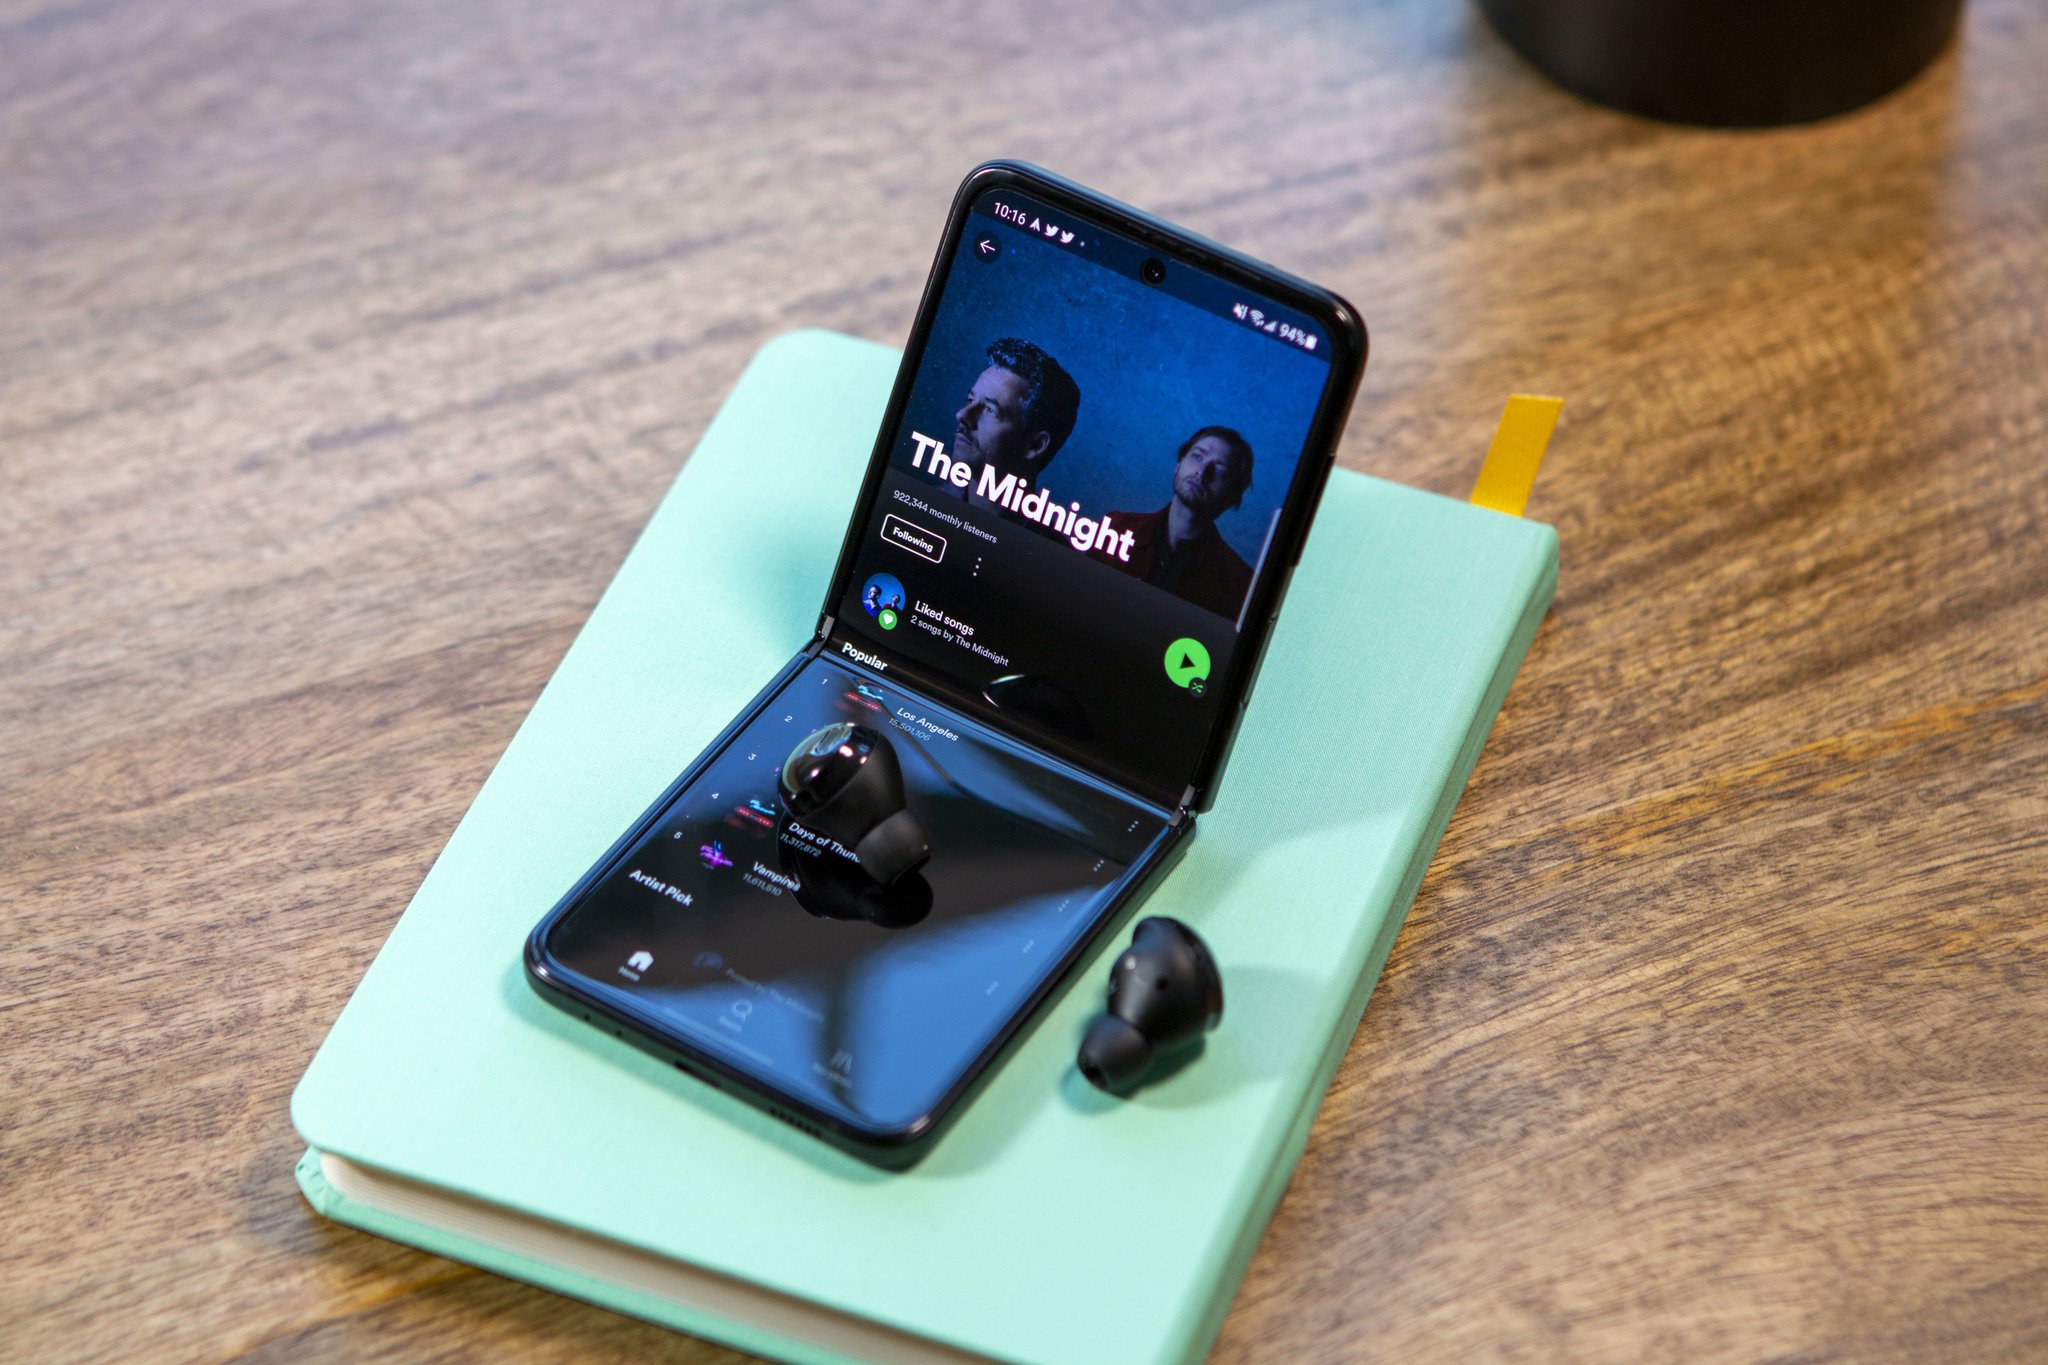 Spotify should stop worrying about Apple and just make a better streaming service